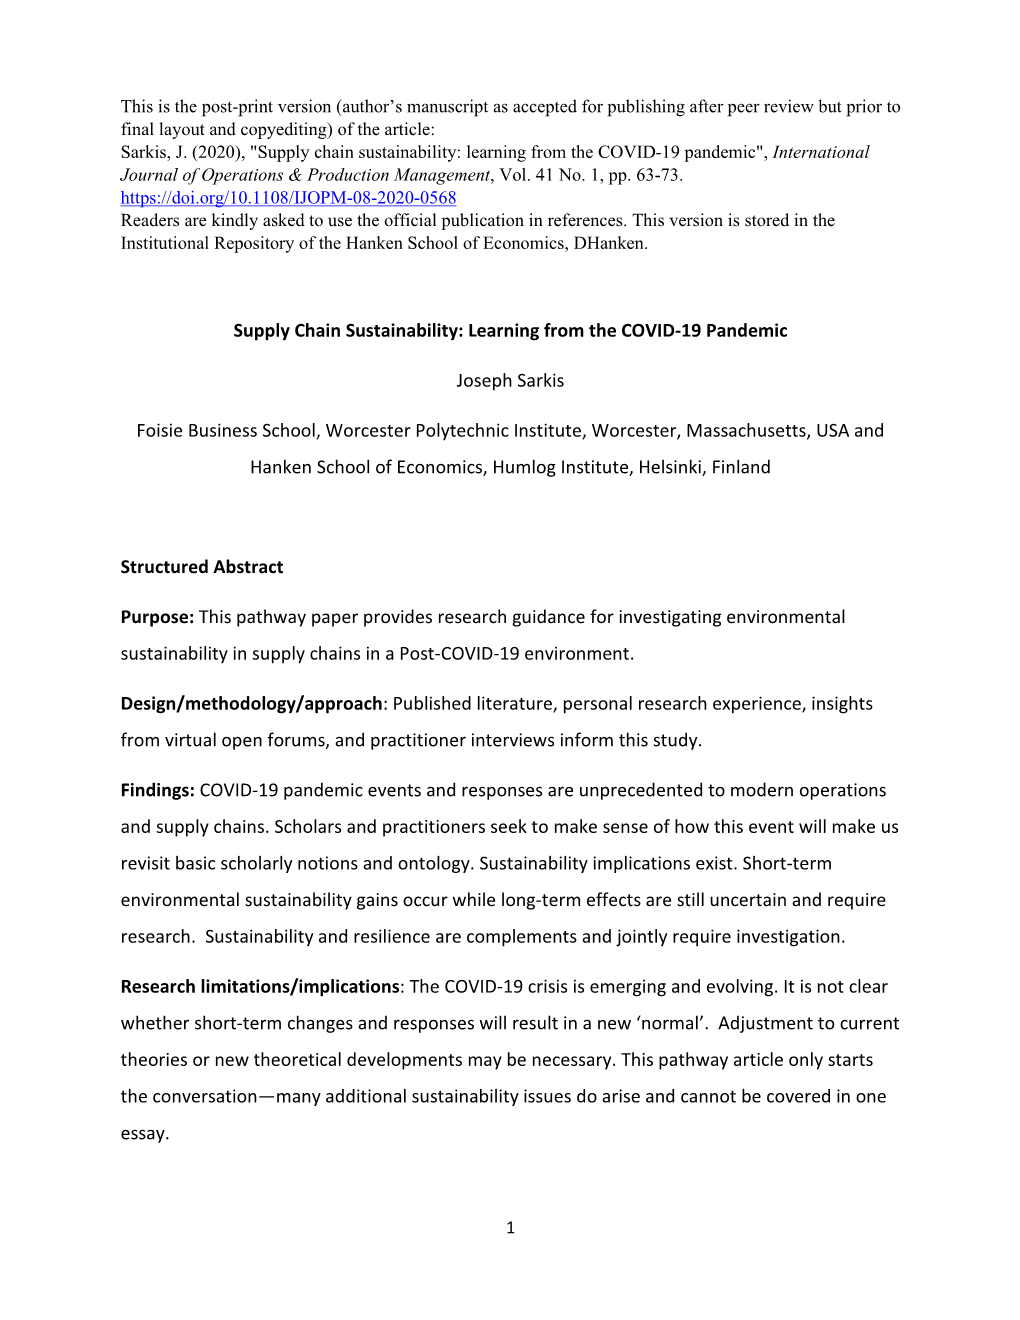 Supply Chain Sustainability: Learning from the COVID-19 Pandemic", International Journal of Operations & Production Management, Vol